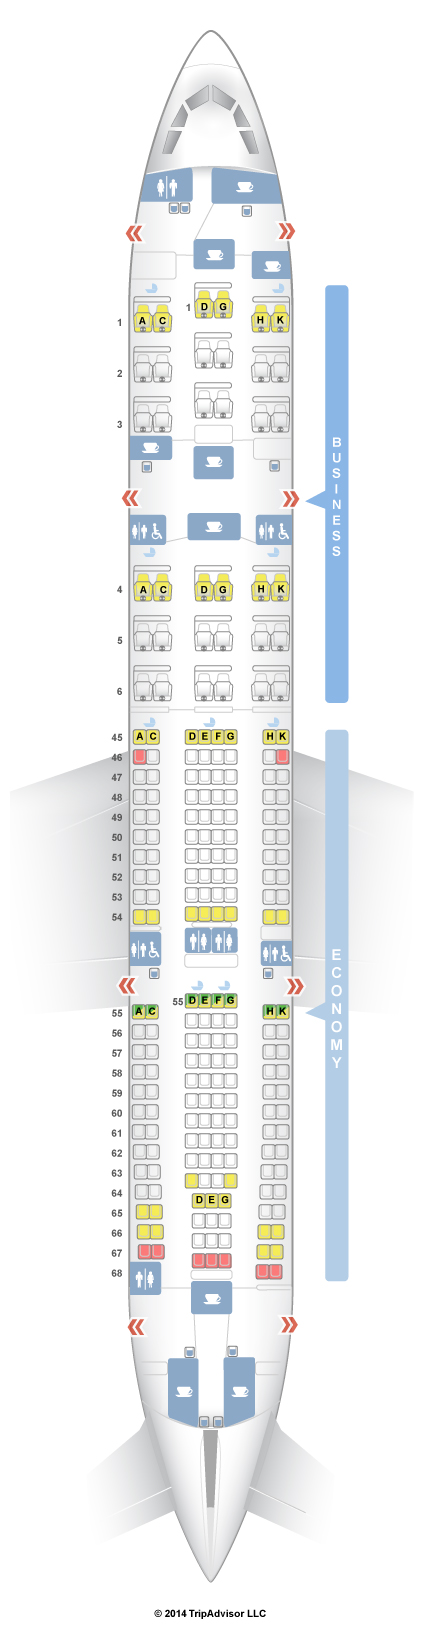 South African Airlines Seating Chart